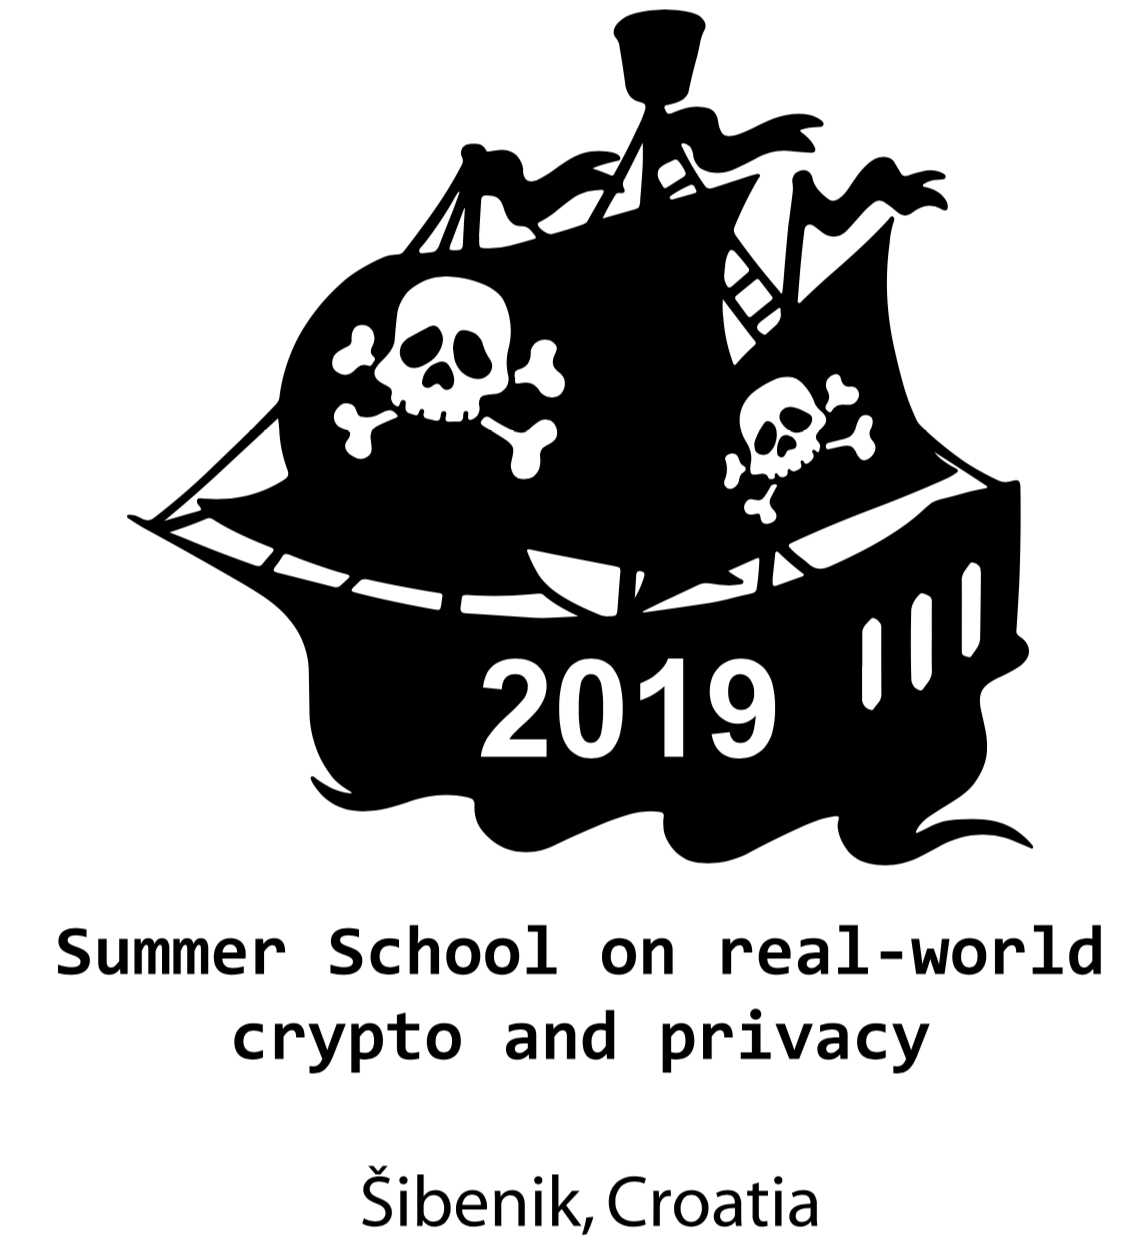 SummerSchool on Real World Crypto and Privacy